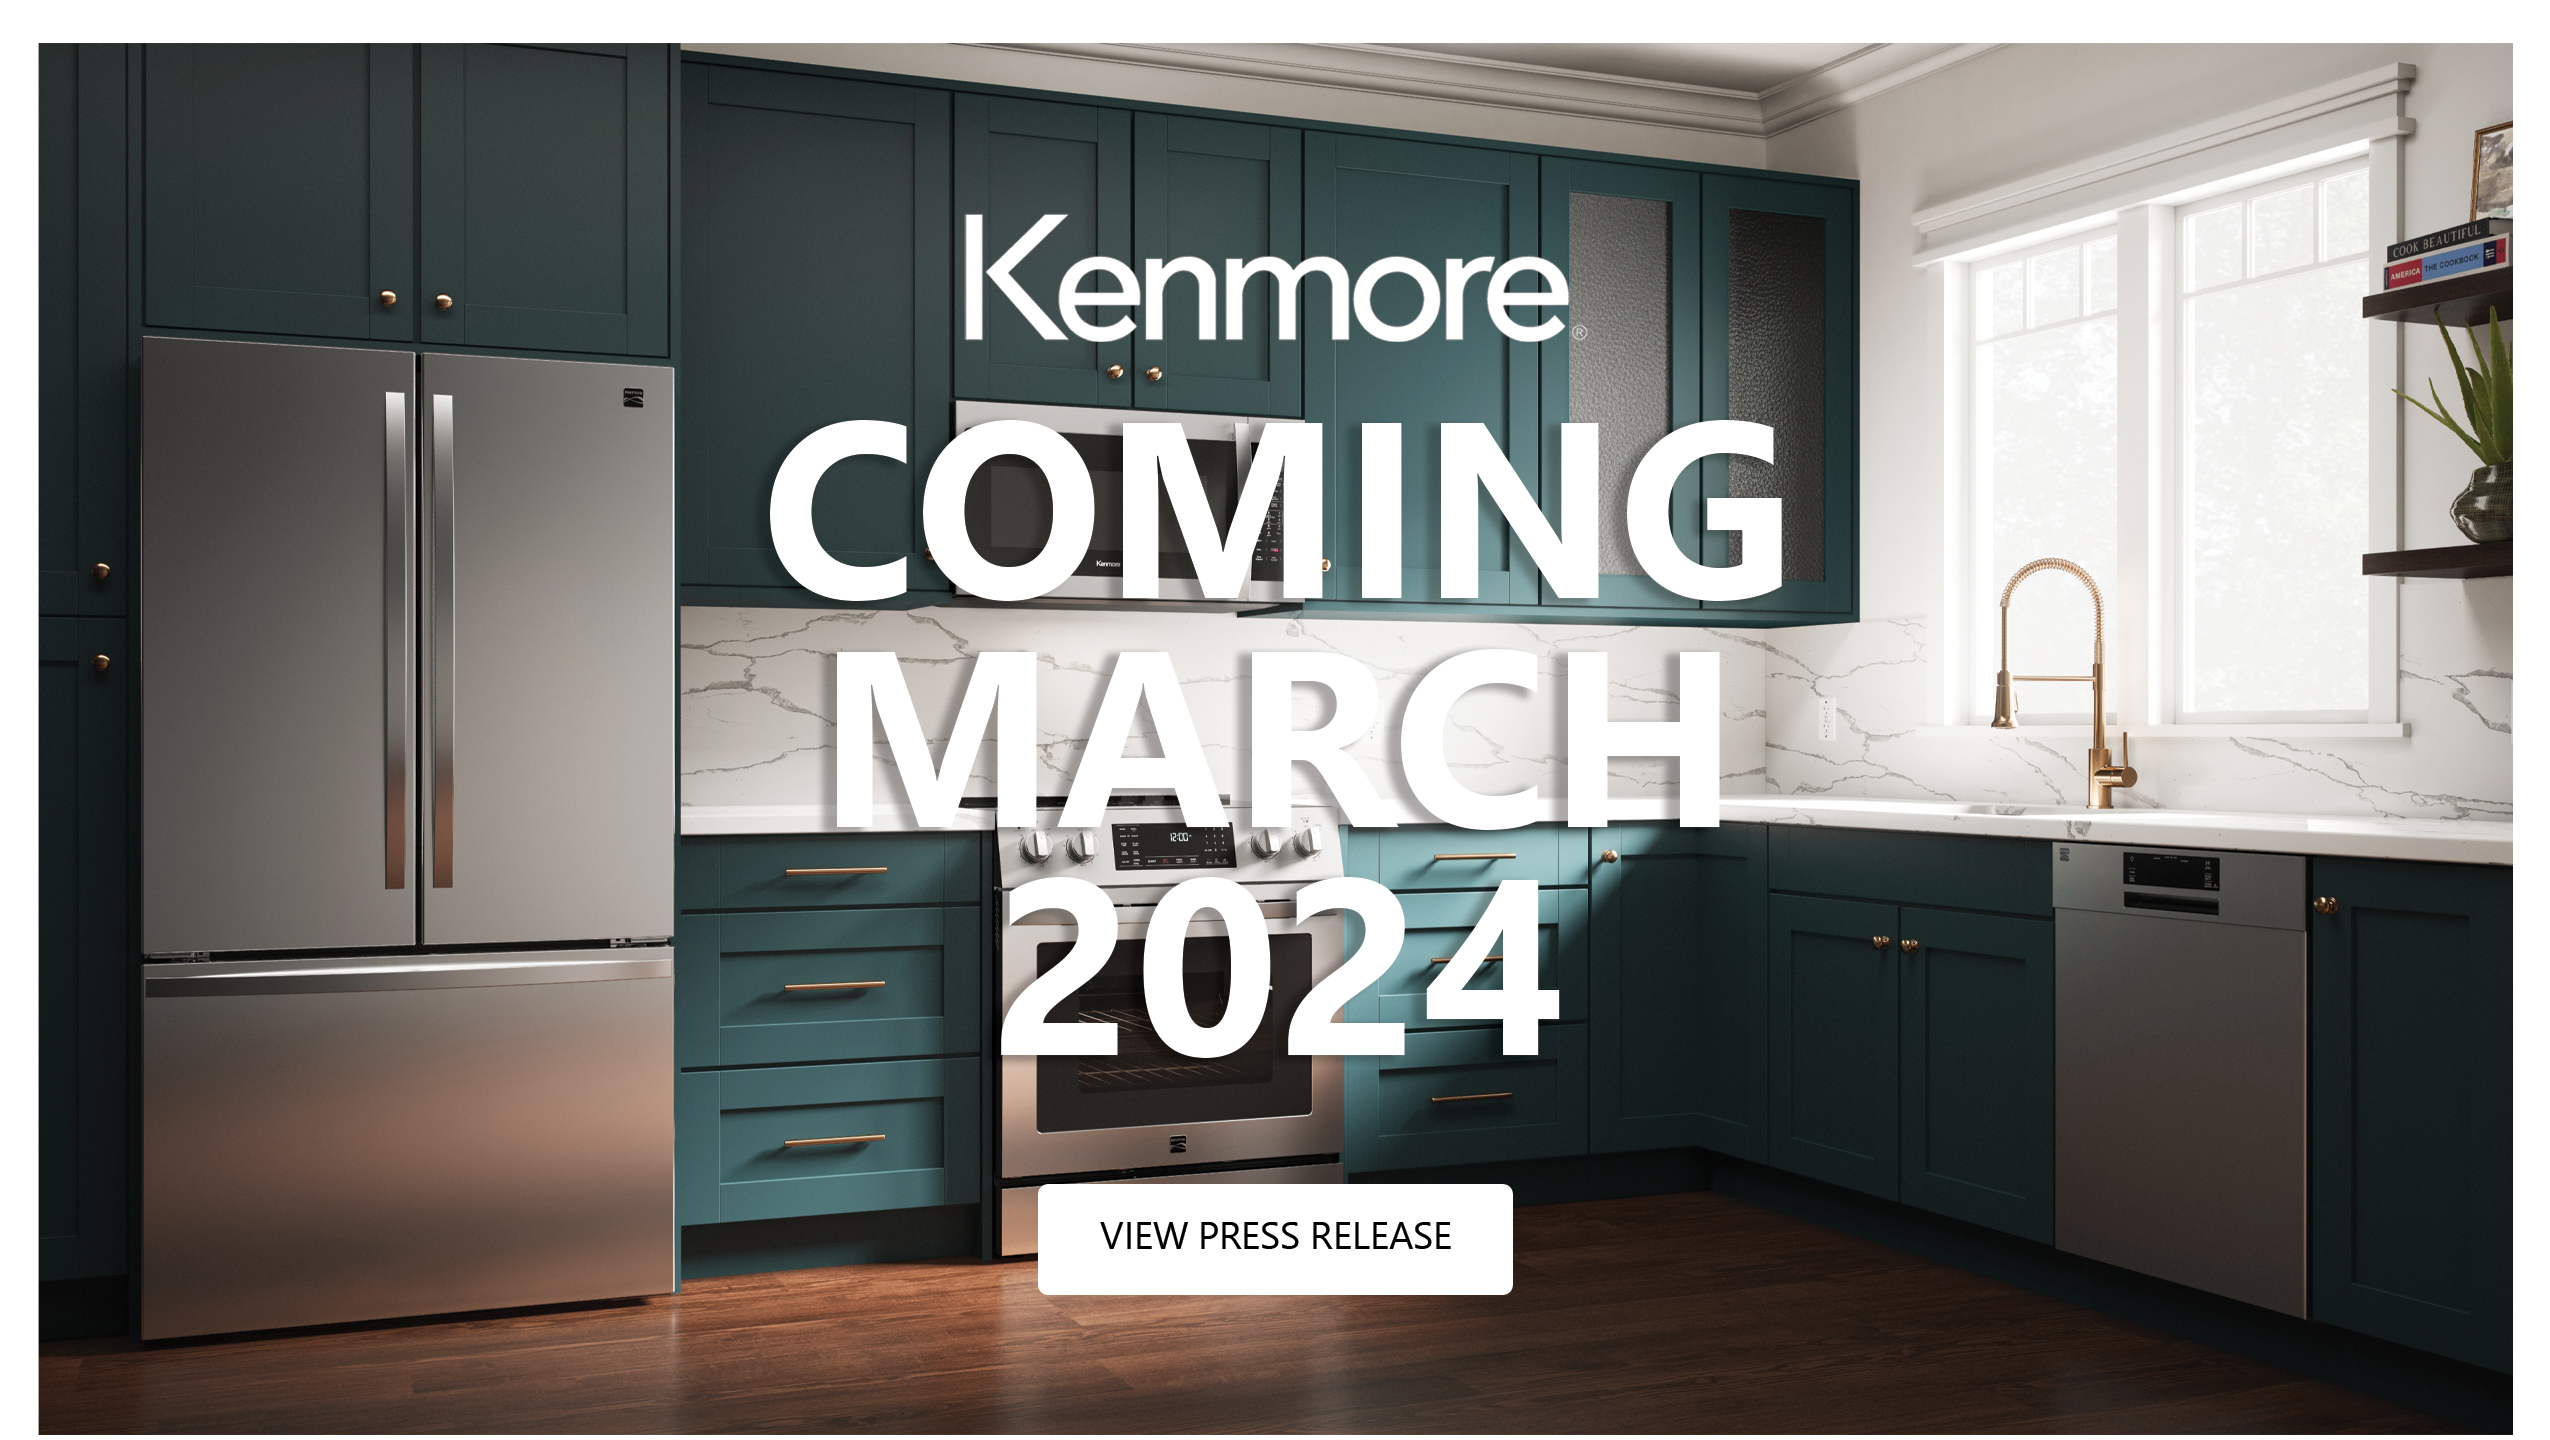 Kenmore Coming March 2024 - View Kenmore Press Release